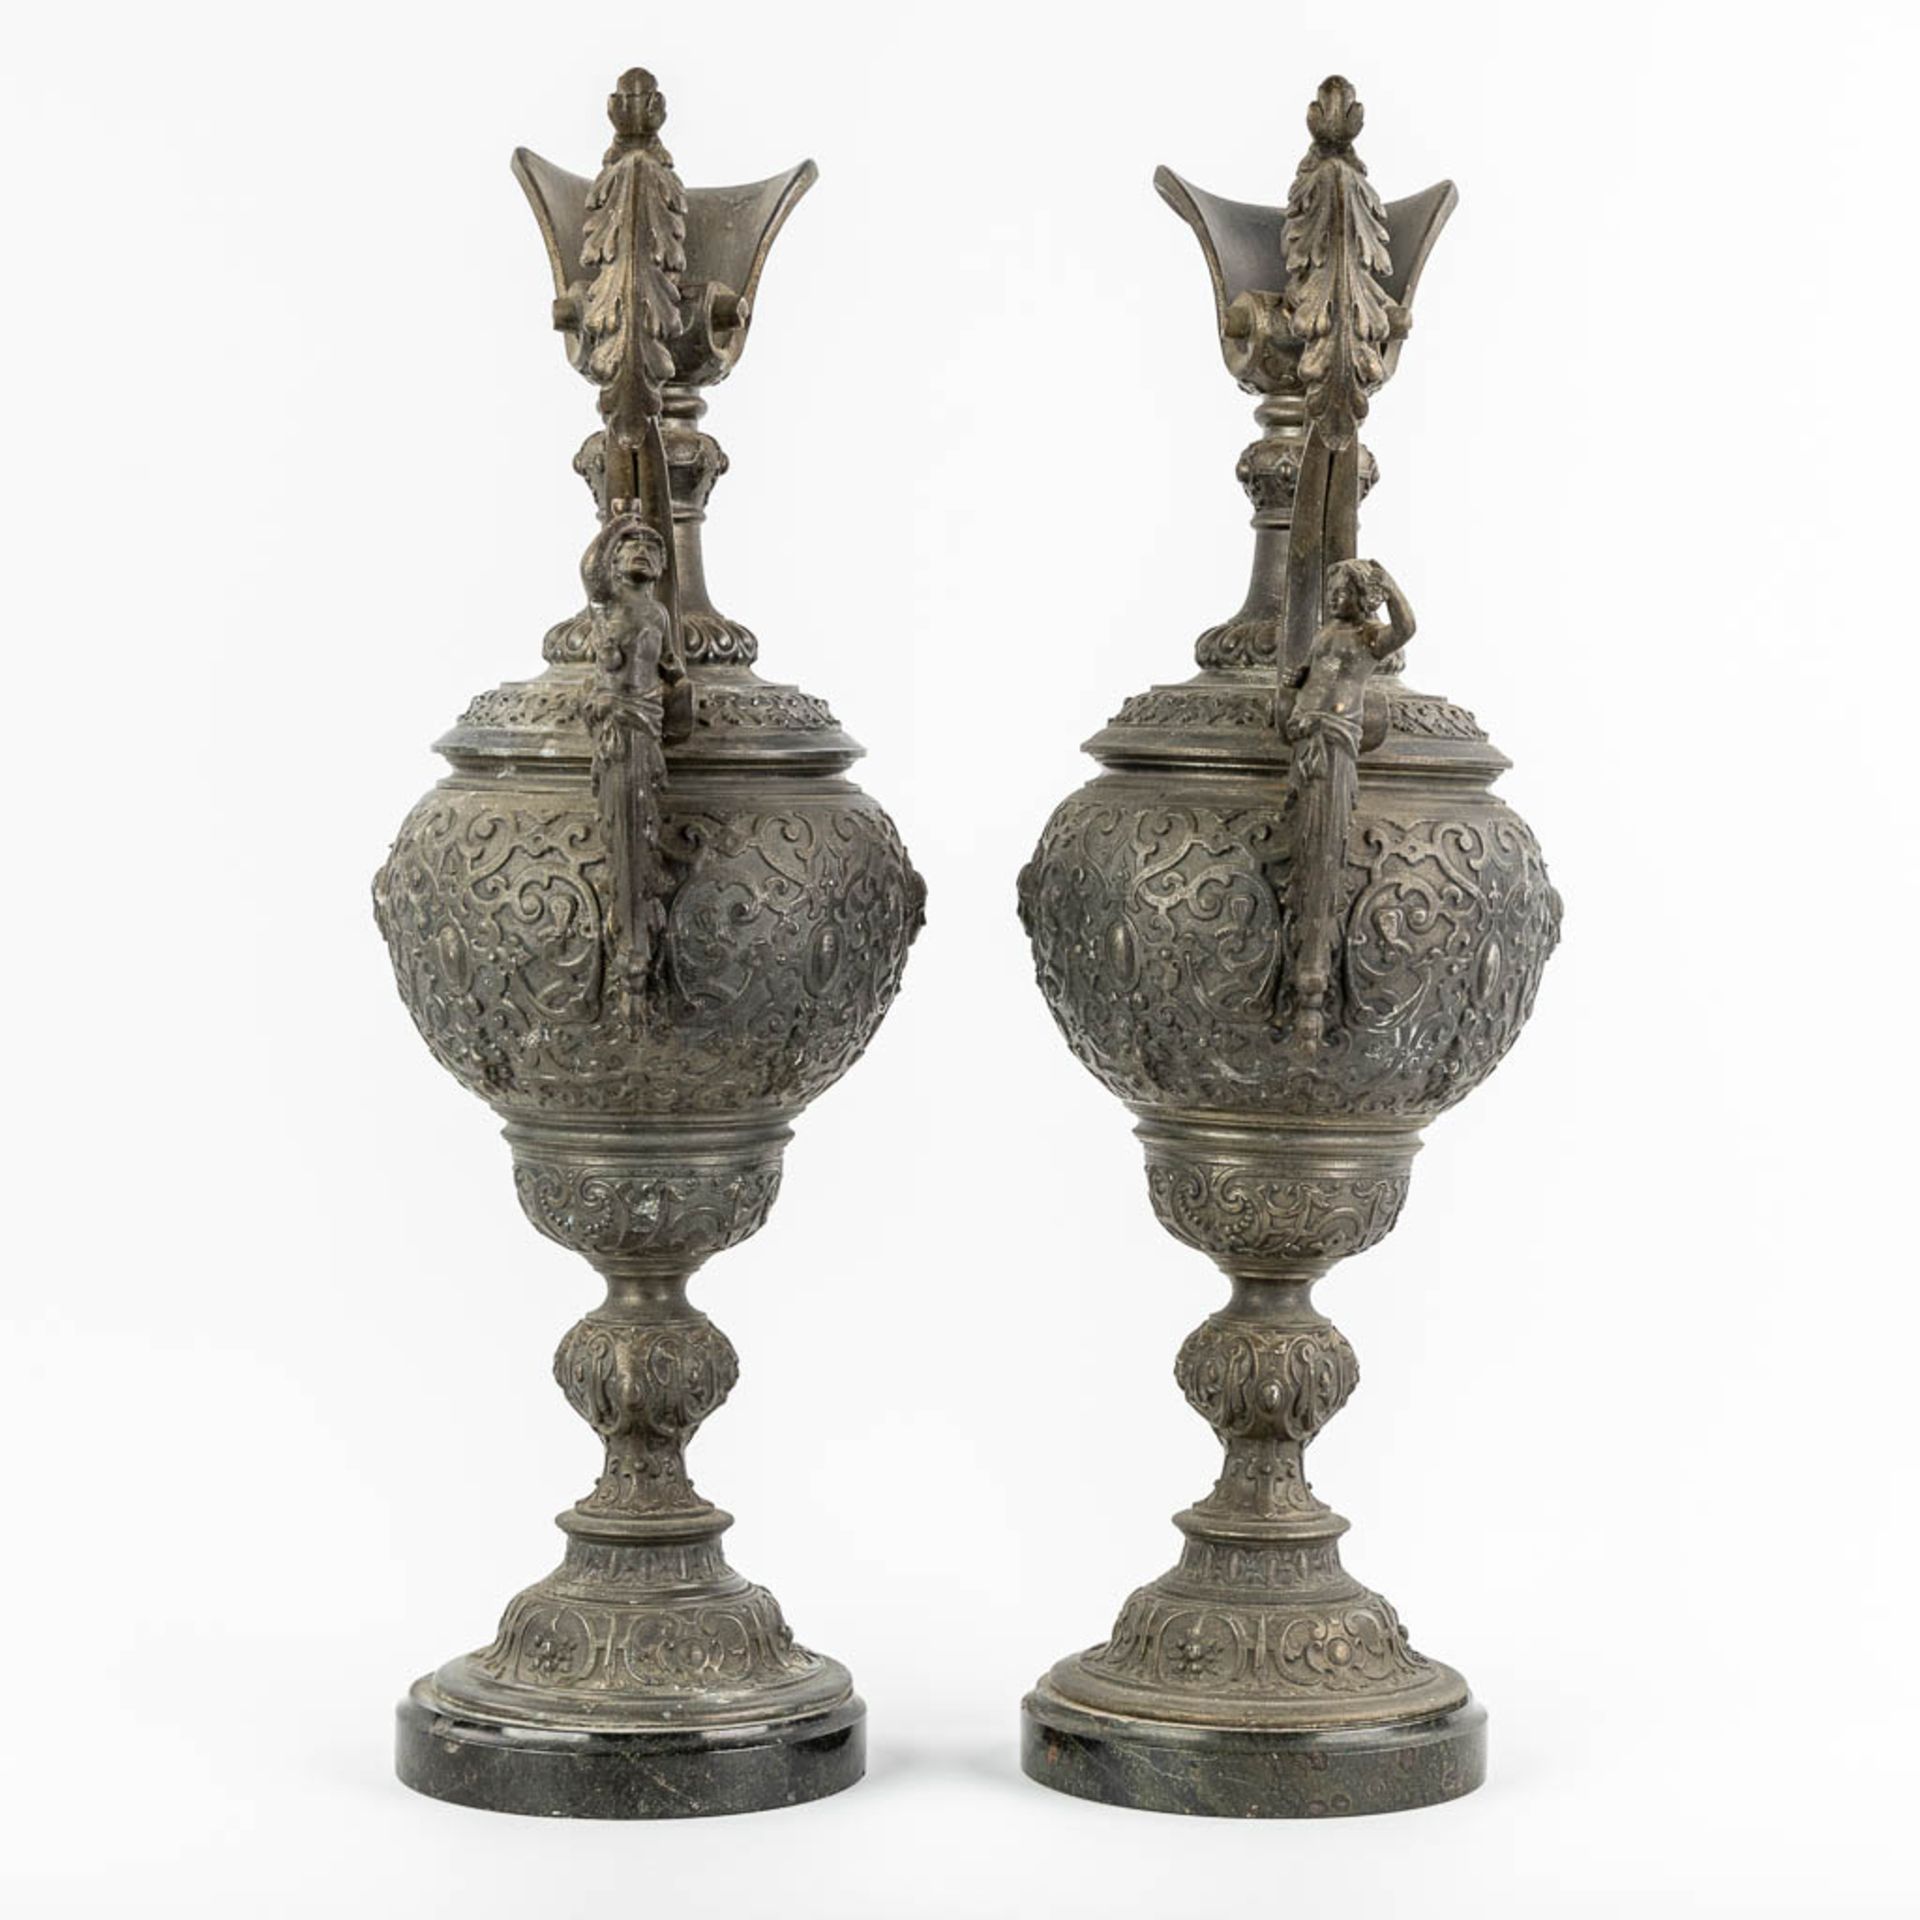 A pair of decorative pitchers, spelter on a marble base. Circa 1900. (L:18 x W:23 x H:56 cm) - Image 4 of 14